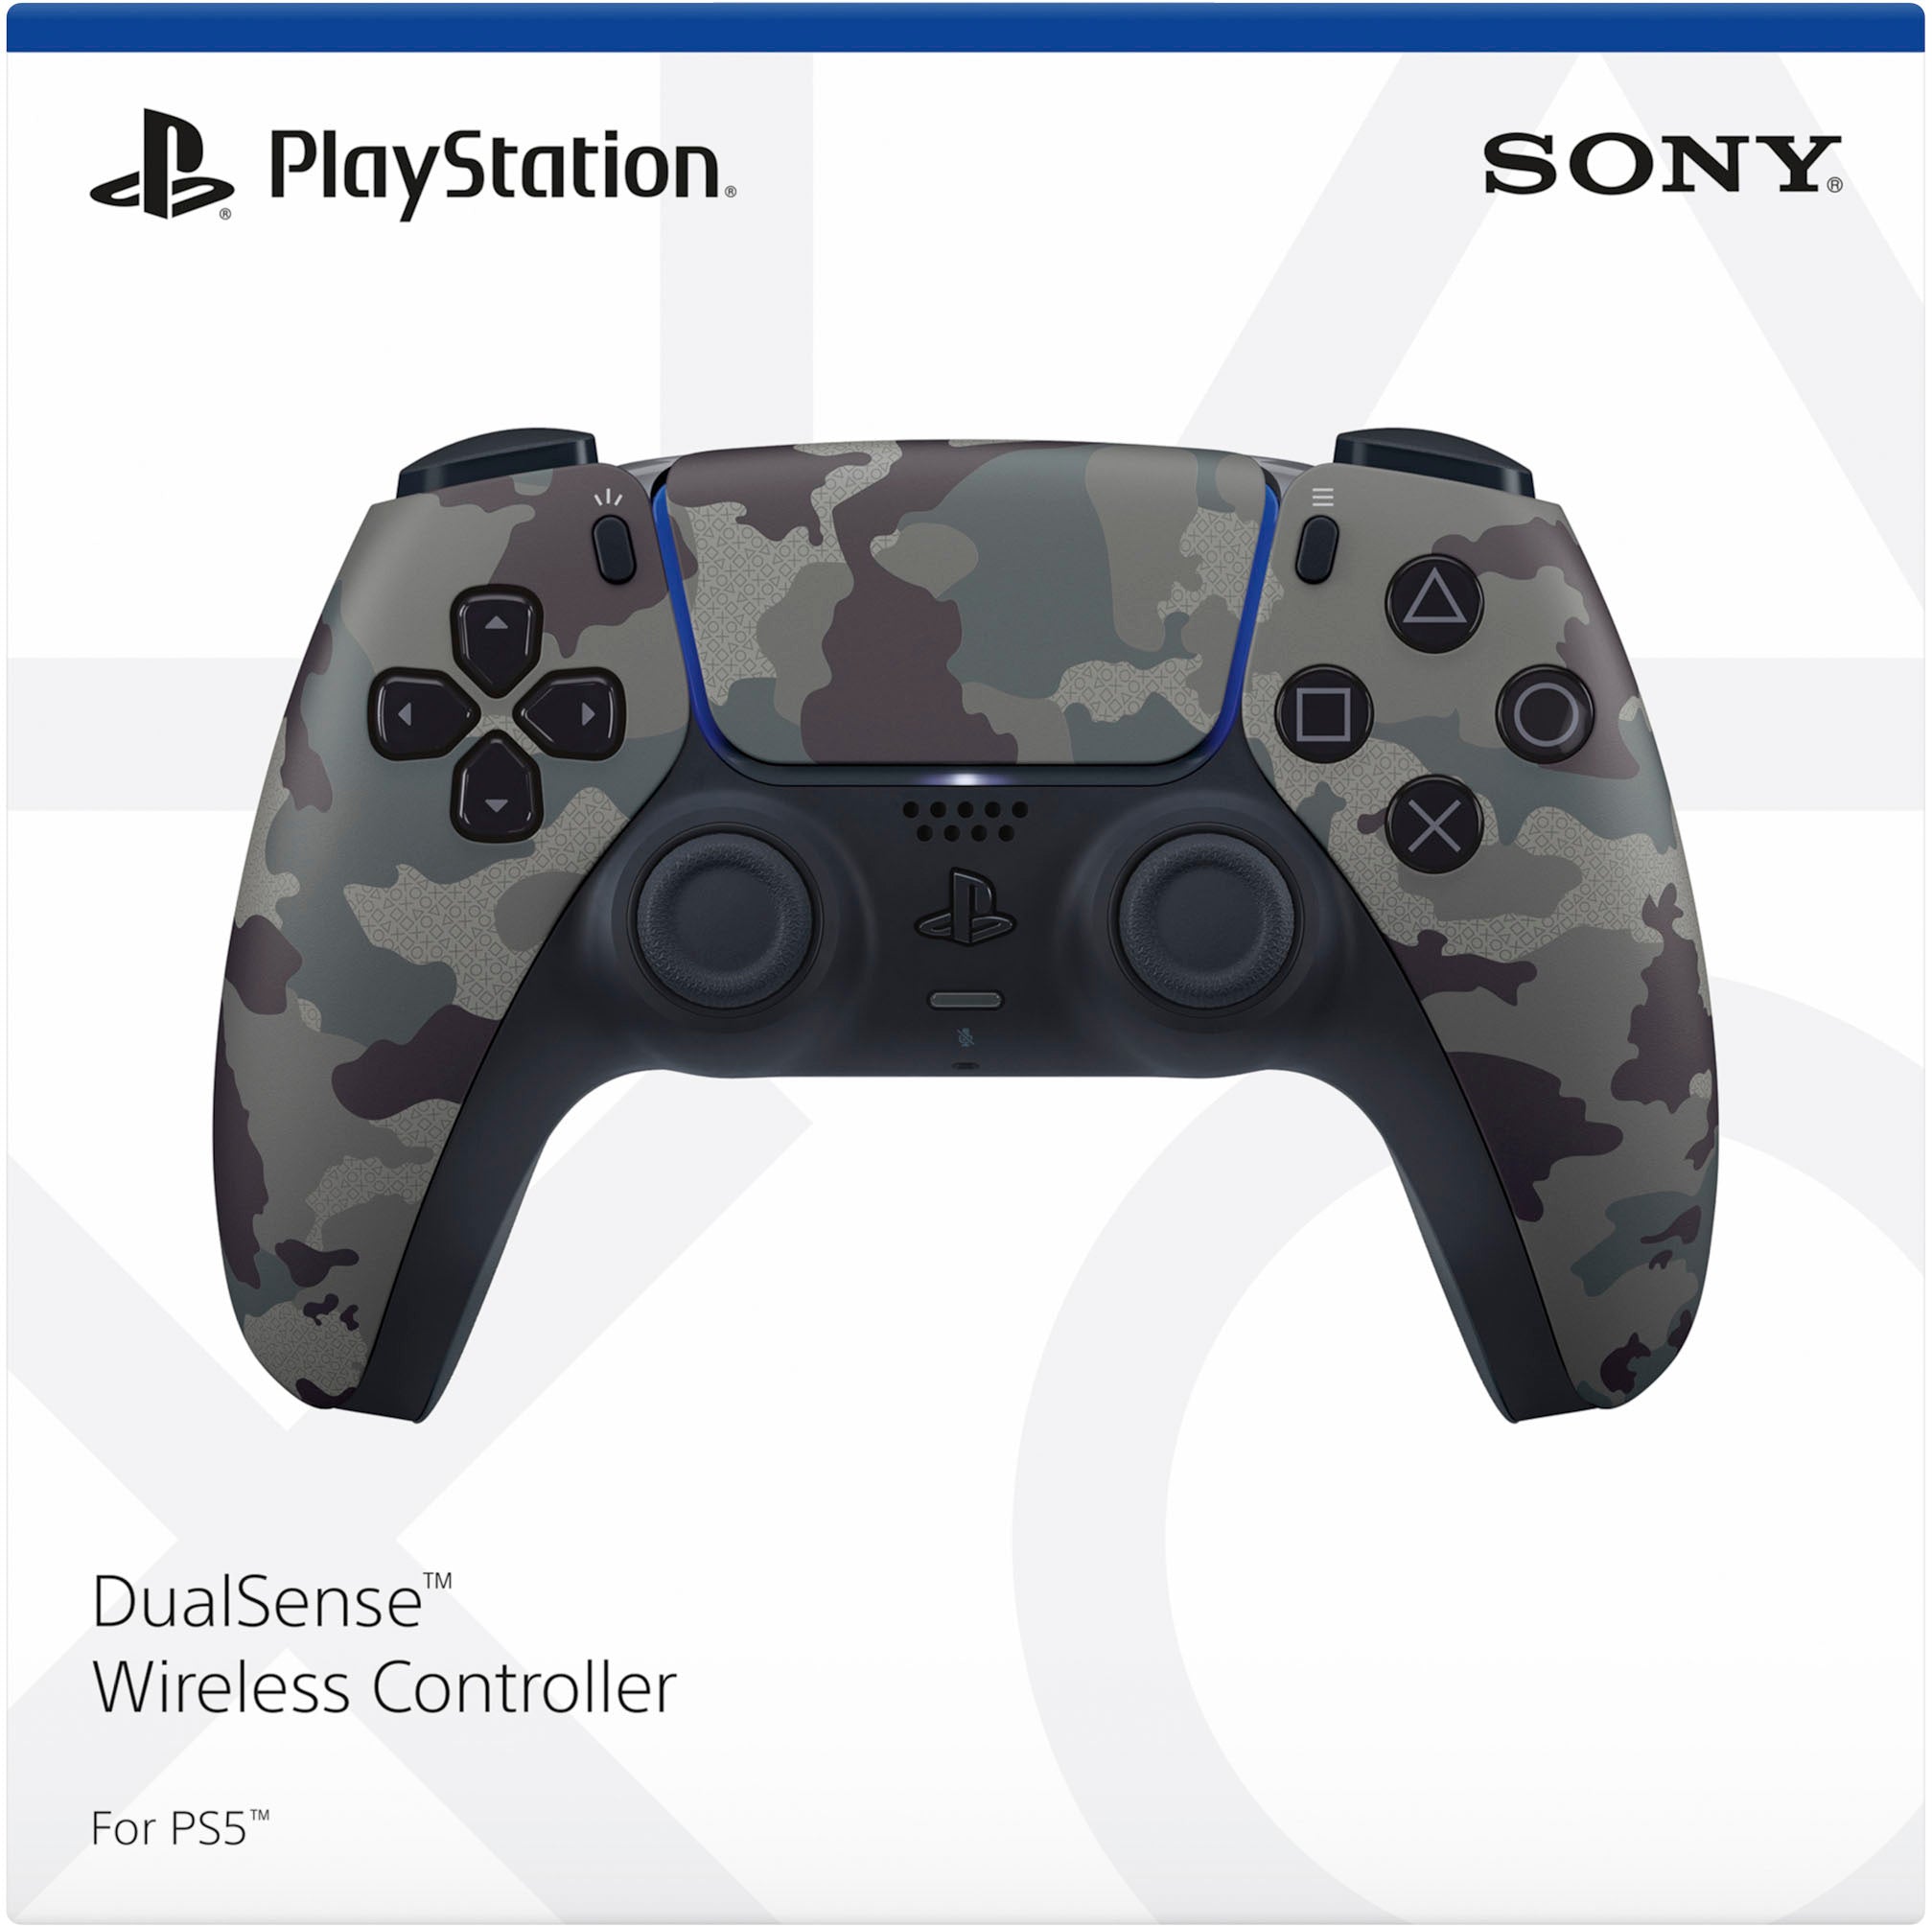 PlayStation 5 Disc Edition Call of Duty Modern Warfare II Bundle with Two Controllers White and Gray Camouflage DualSense and Mytrix Hard Shell Protective Controller Case